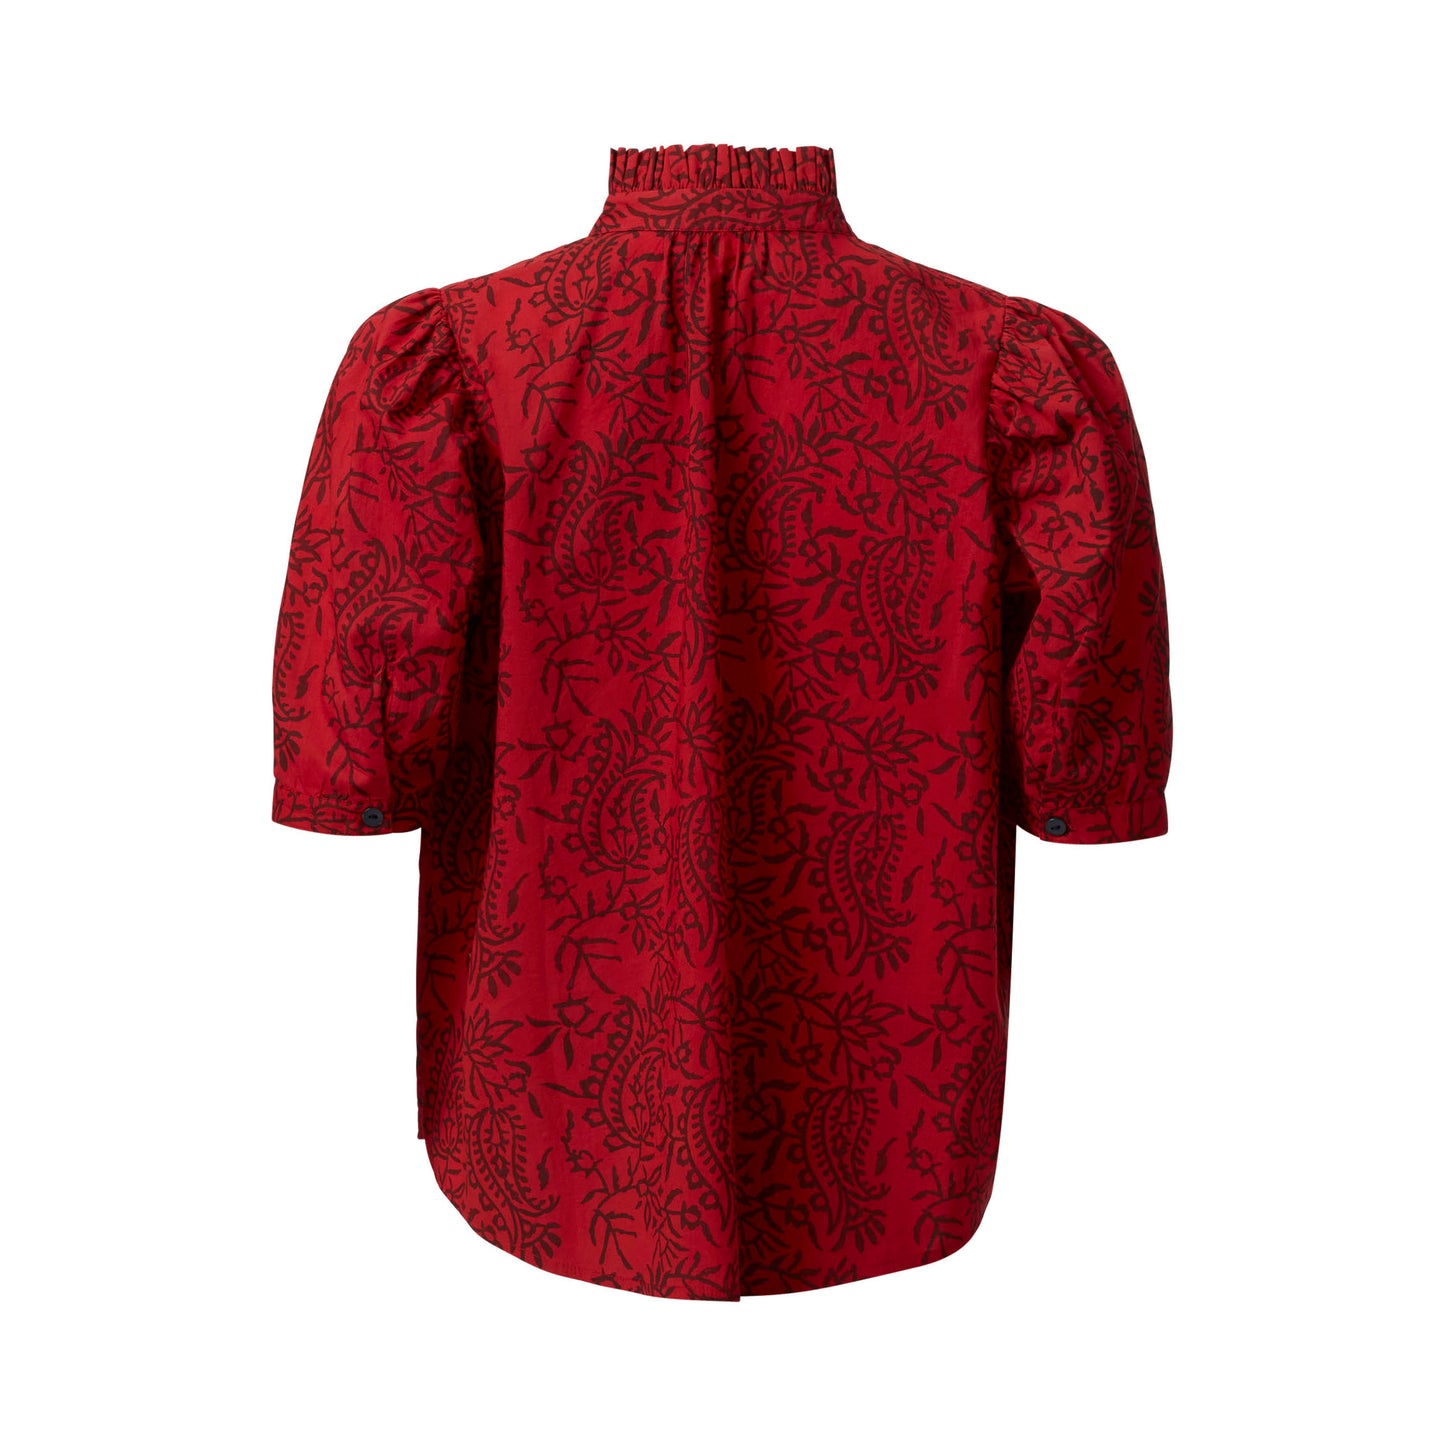 Winnie Paisley Blouse in Red Spice